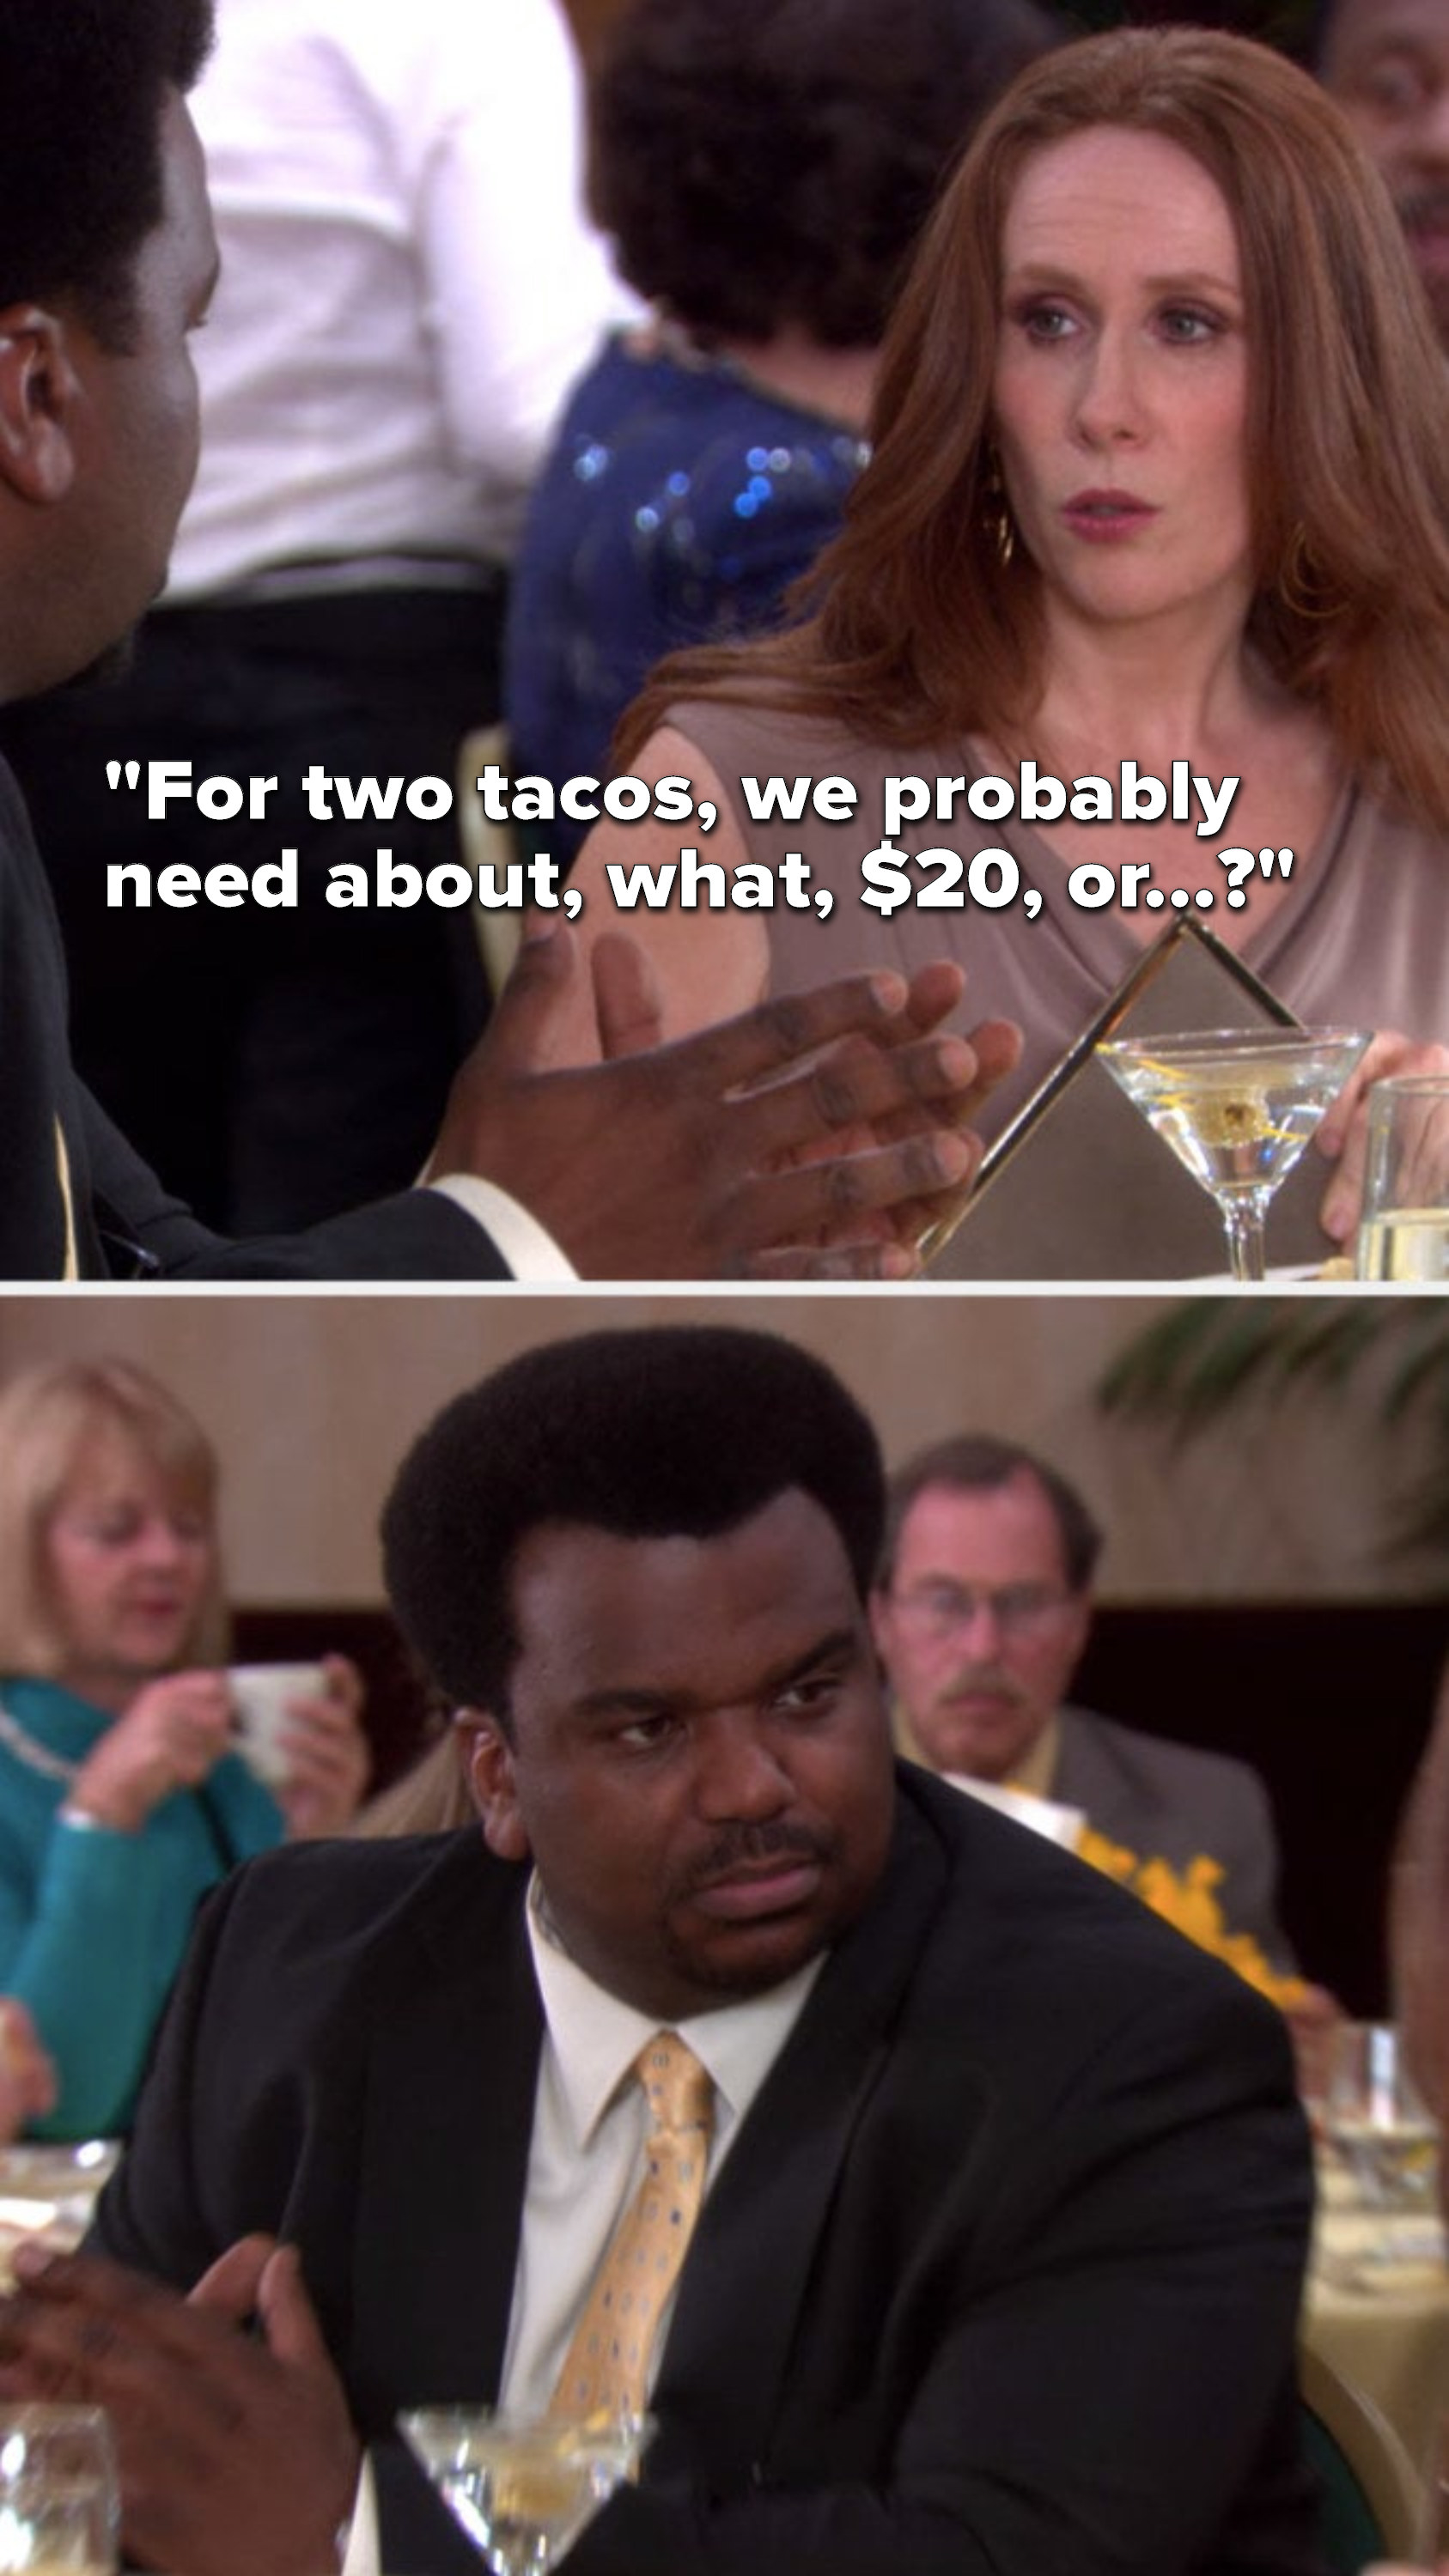 Nellie says, For two tacos, we probably need about, what, $20, or, and Darryl looks at her